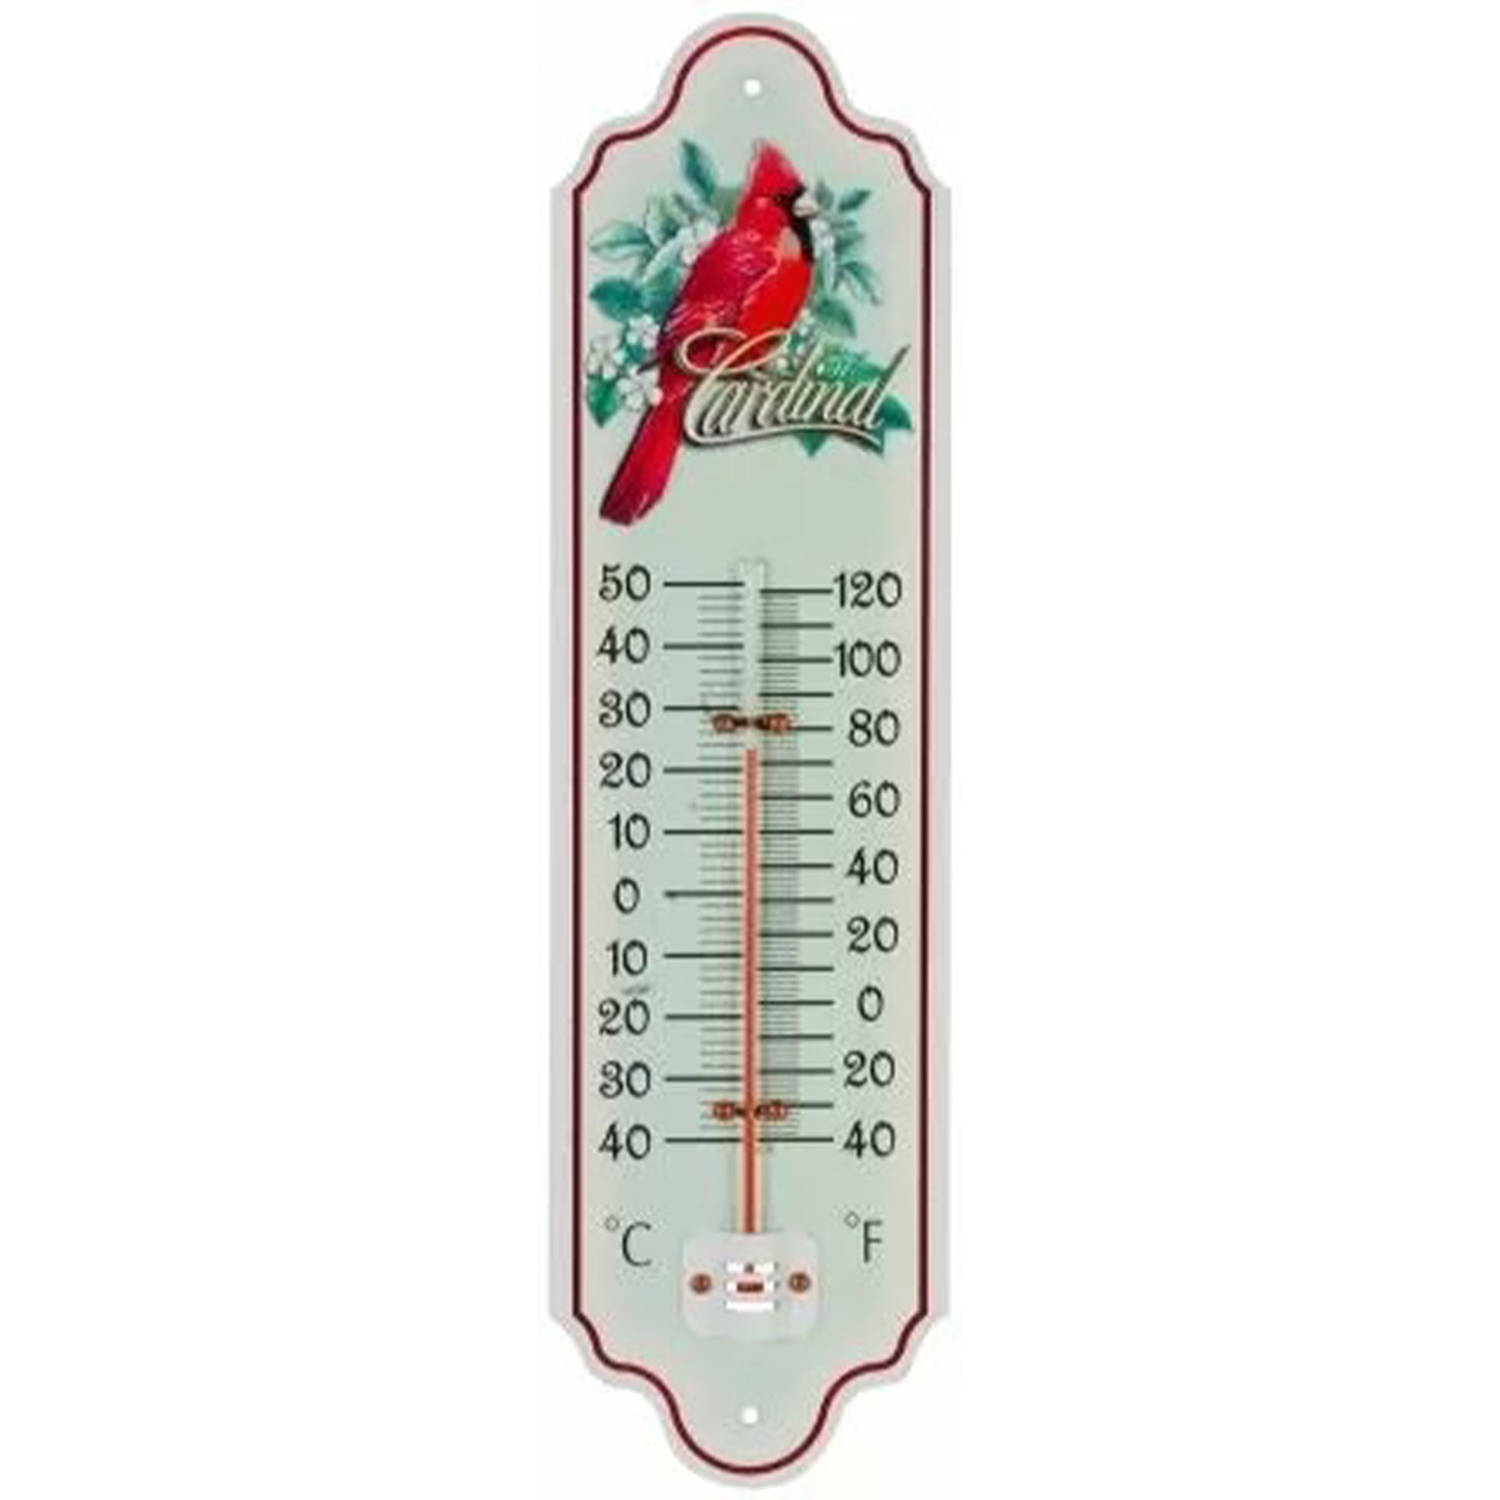 Thermometer - metaal - 28 cm - vogel - Buitenthermometers